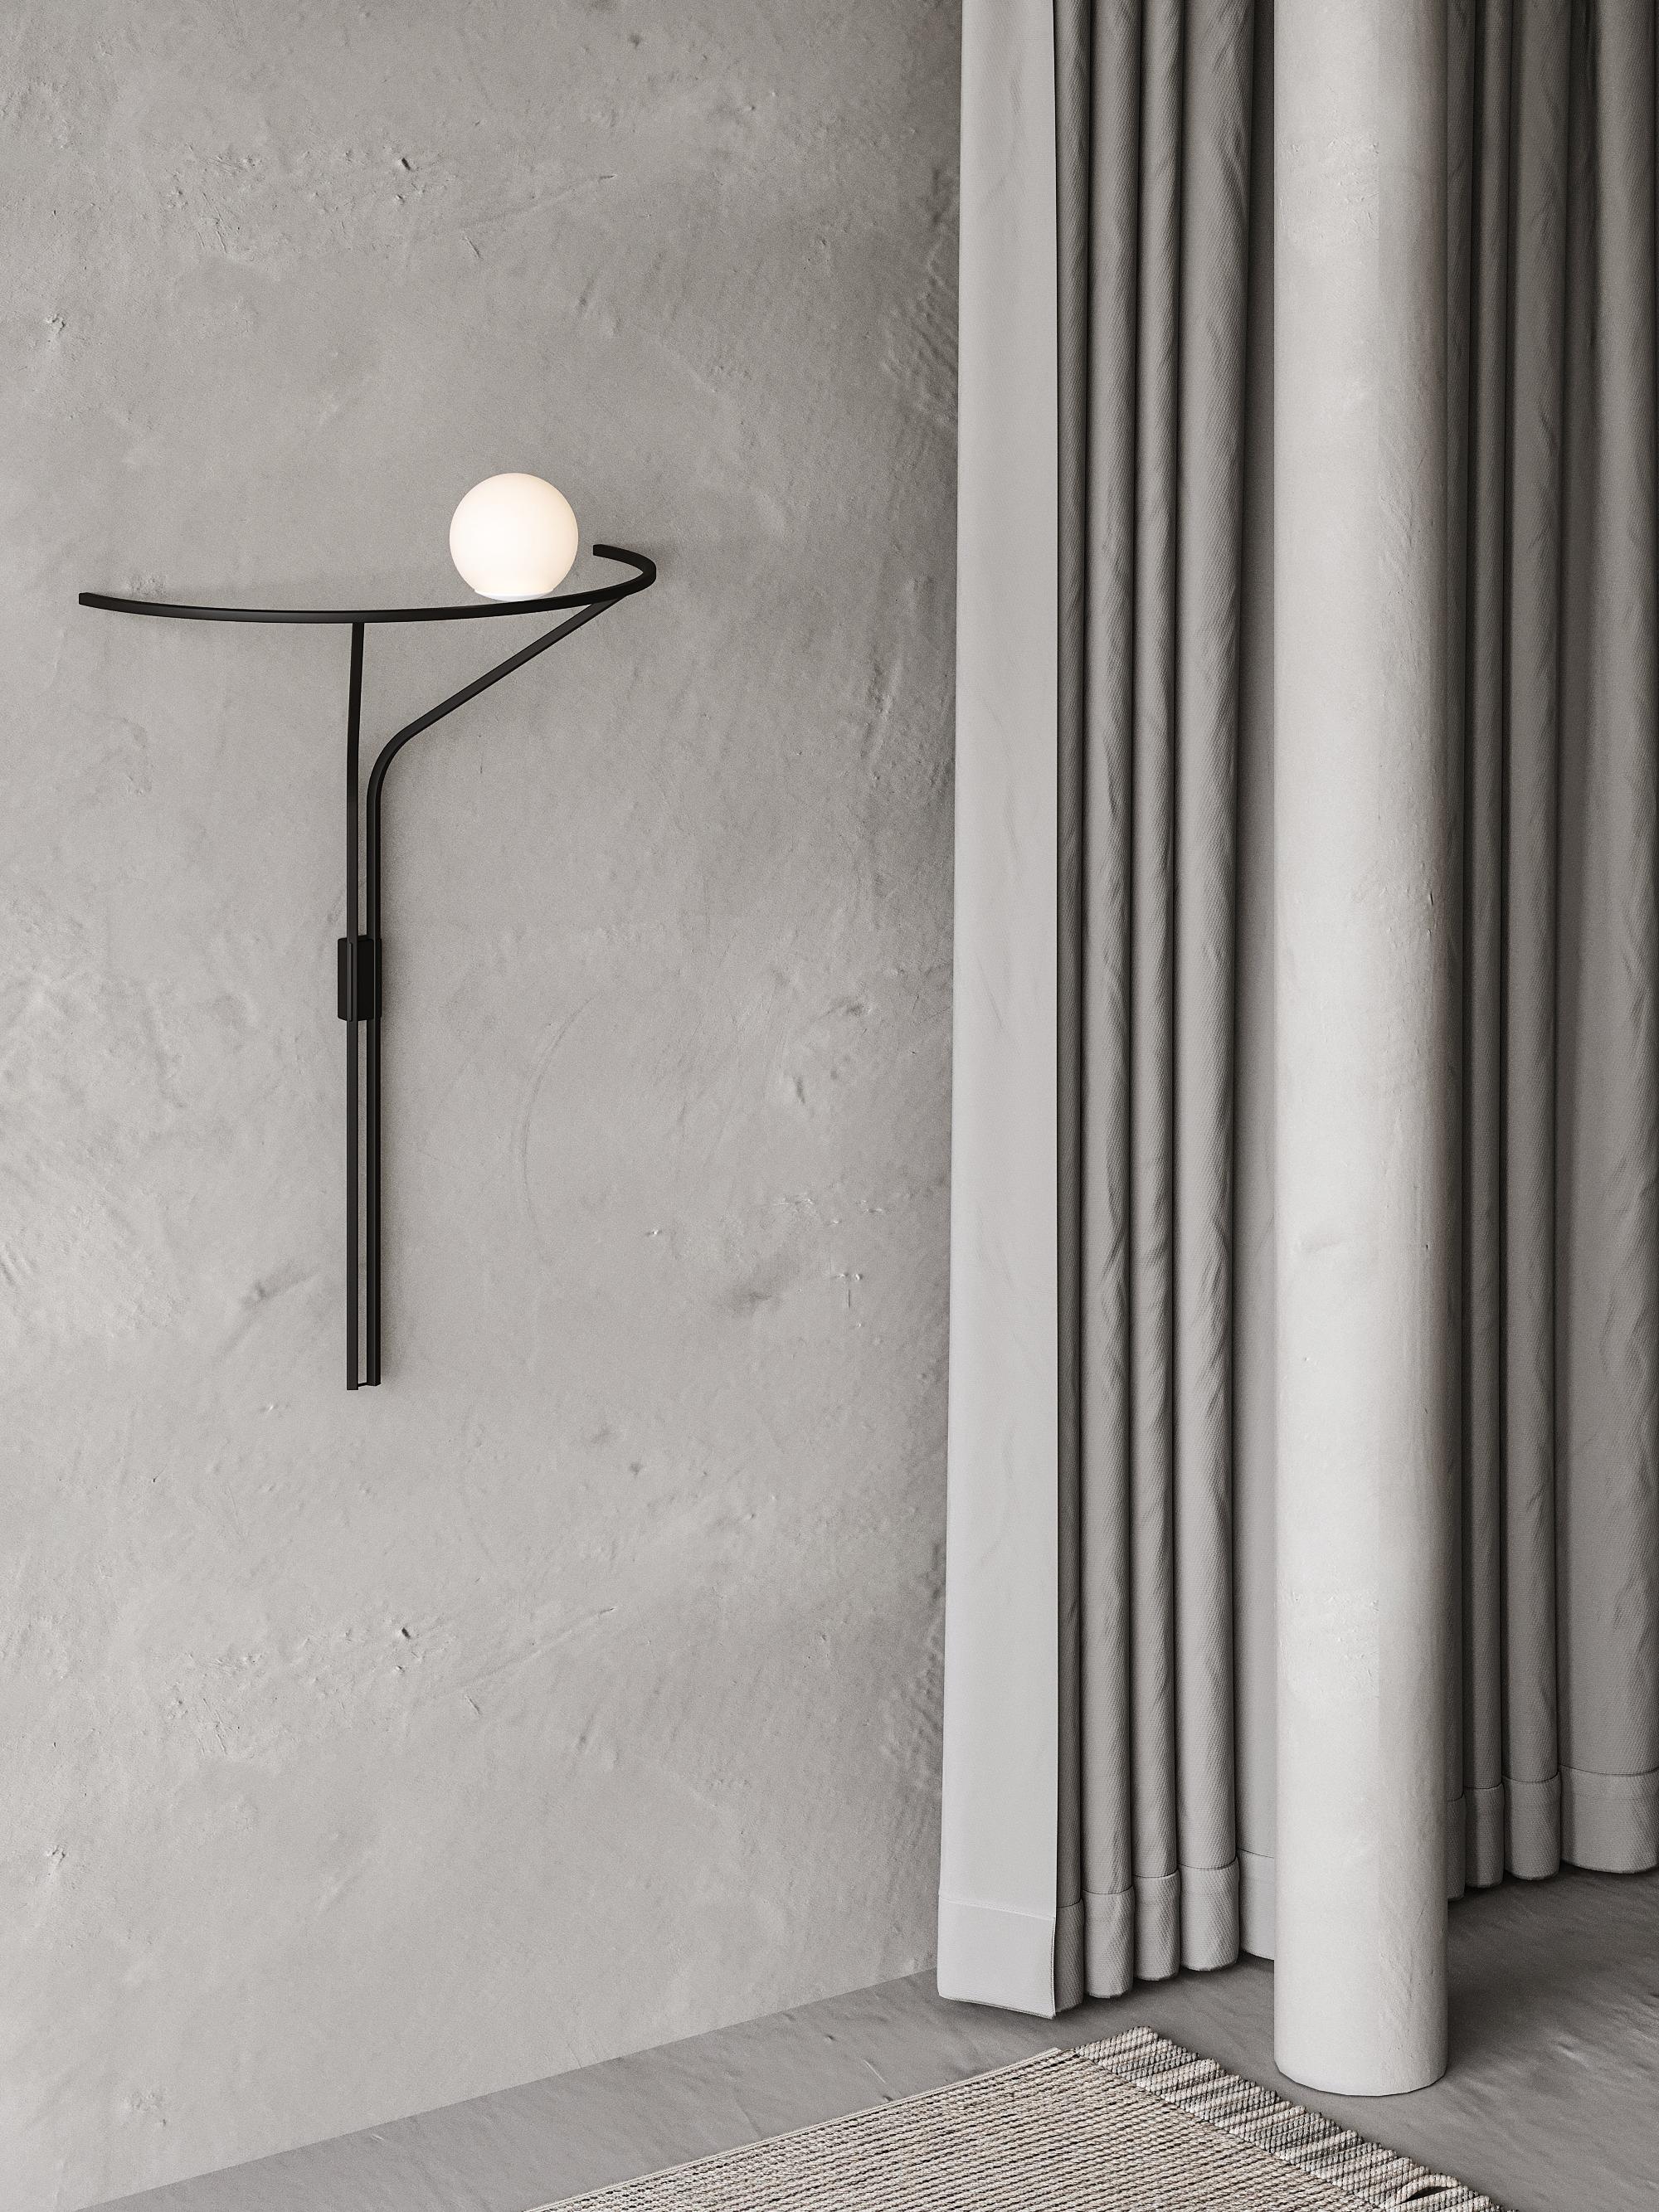 NA LINII
wall lamp

DESCRIPTION
It is a charismatic product that should not be perceived literally, but with a goal to distinguish the symbolism and image of the source.

Pure geometric figures build the lighting fixture; rectangle lines and a